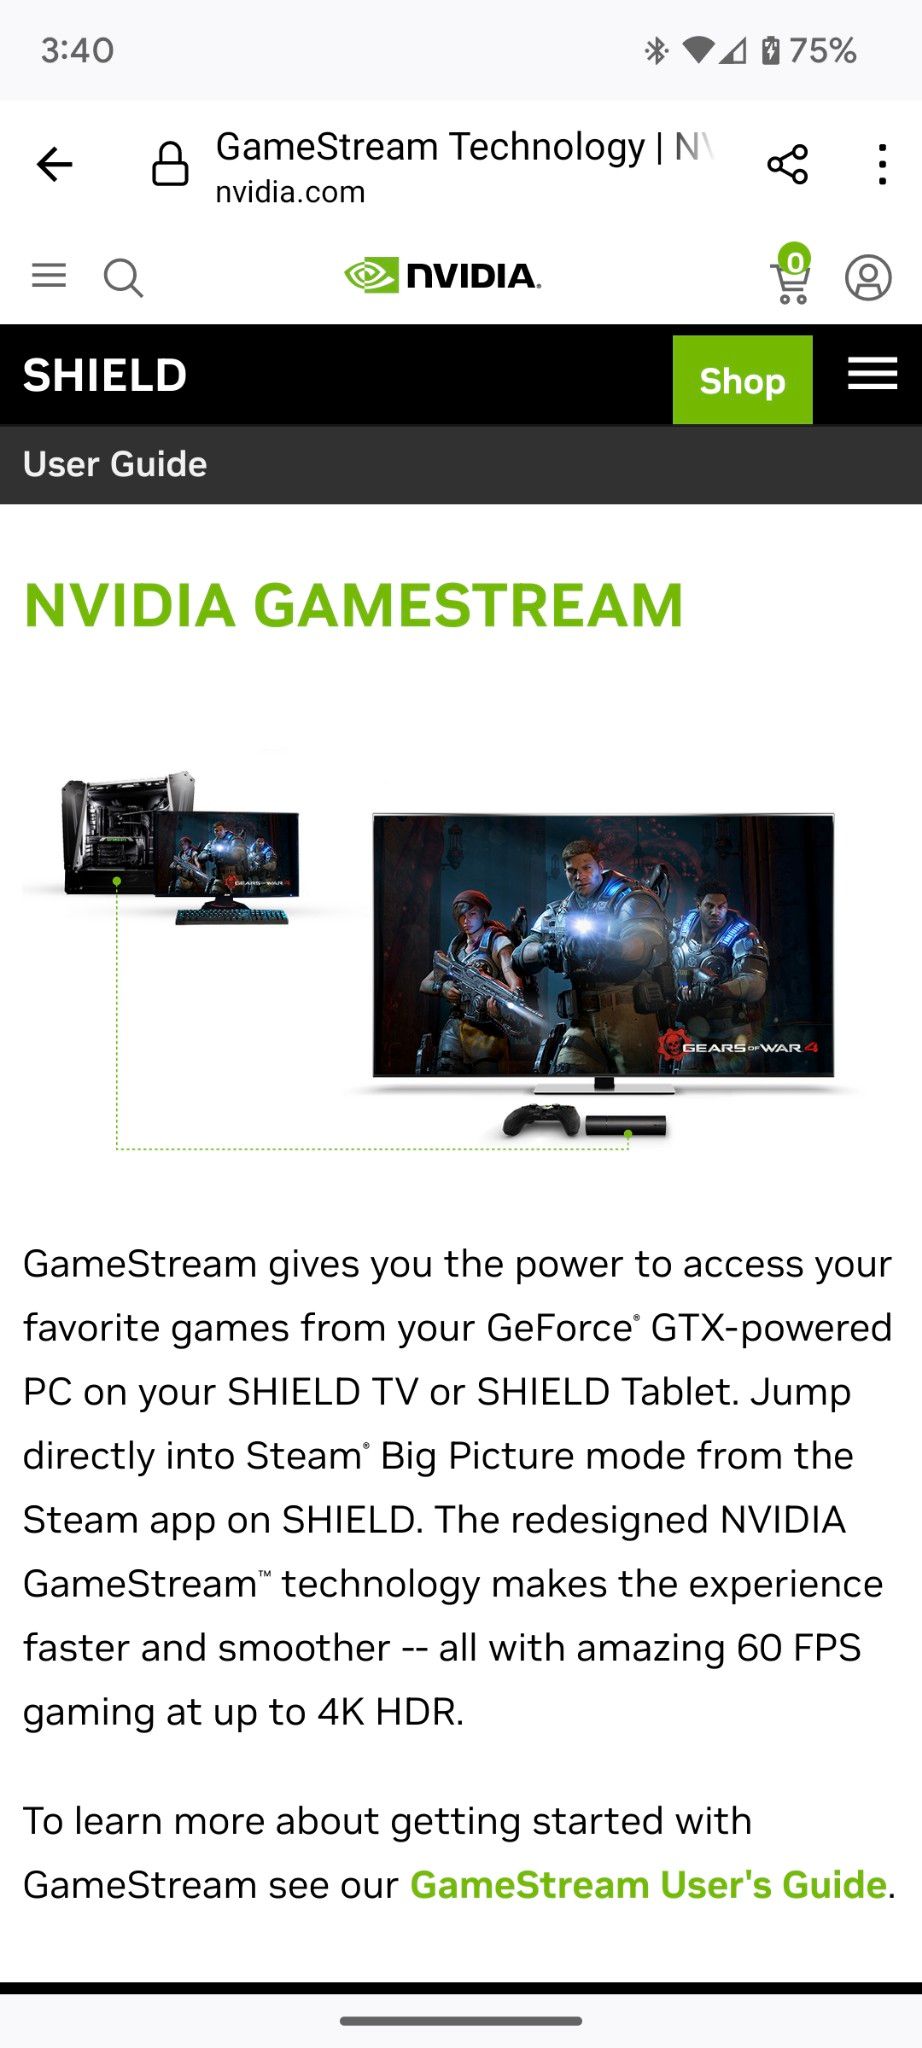 The NVIDIA GameStream home page